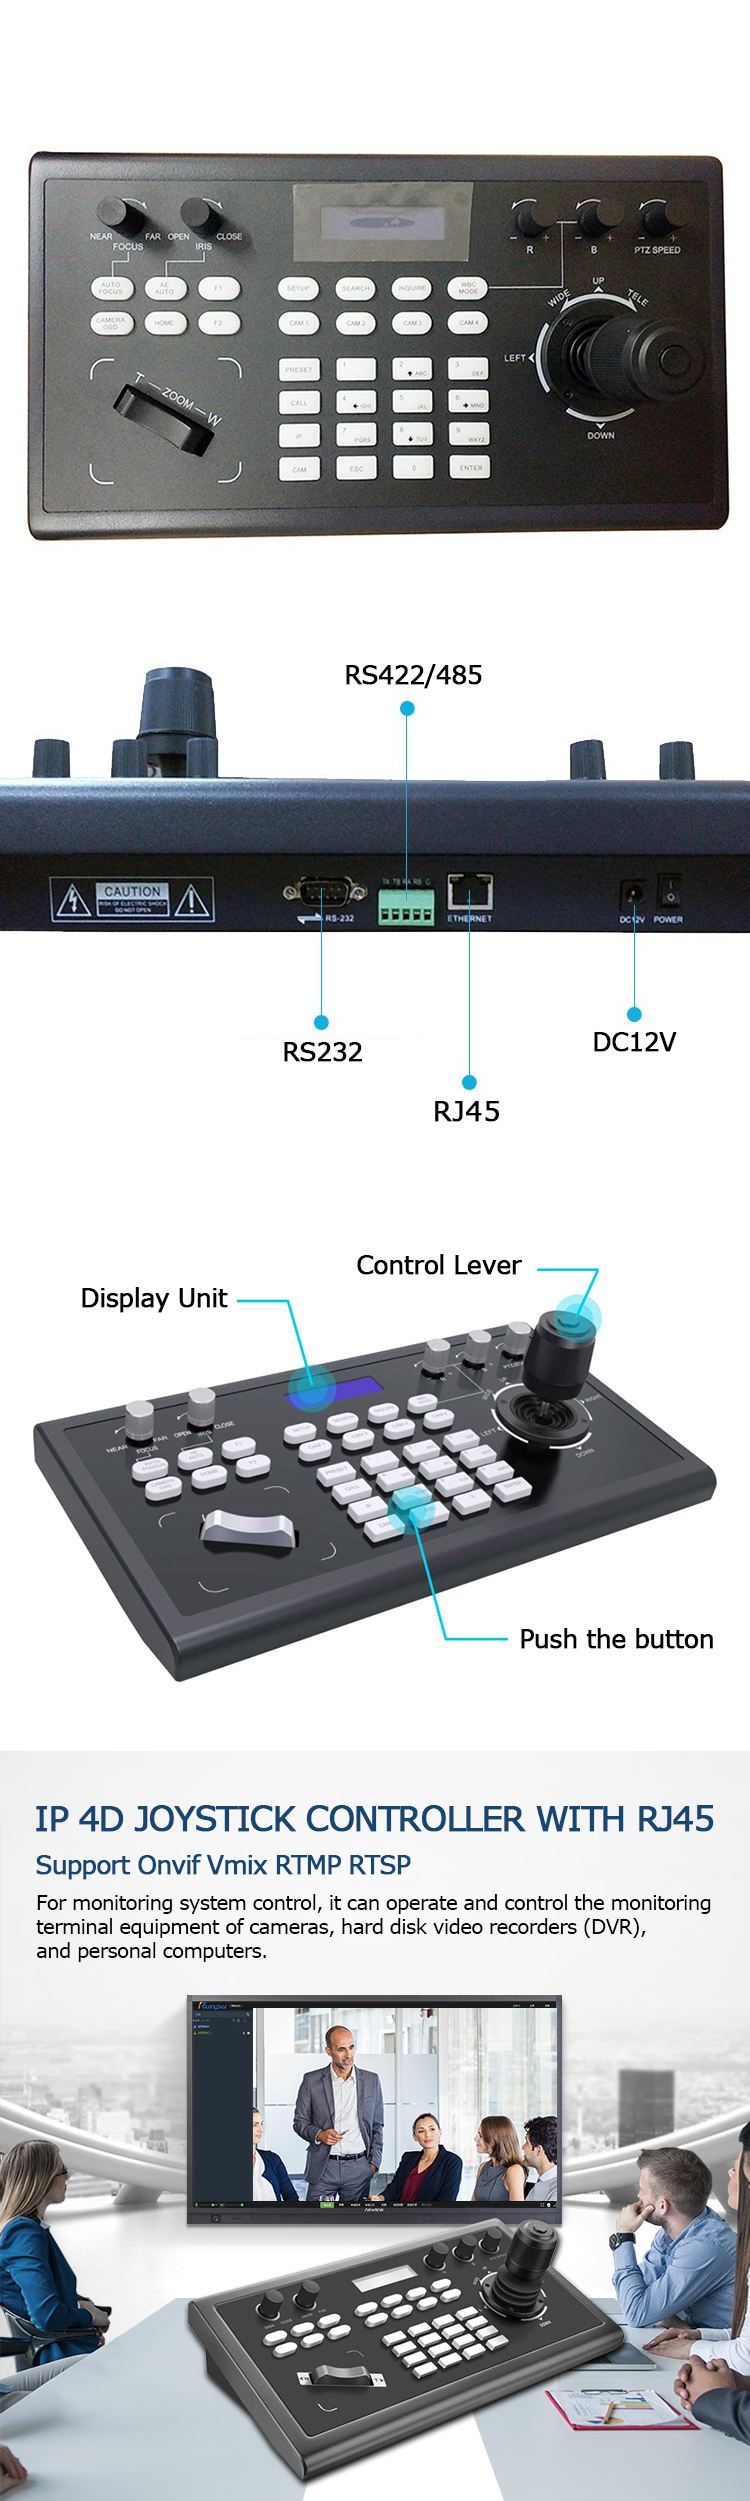 D50 Broadcast IP 4D Joystick Controller with RJ45 Supports Onvif RTMP RTSP Vmix Wirecast Visca PElCO-D/P for 255 cameras top